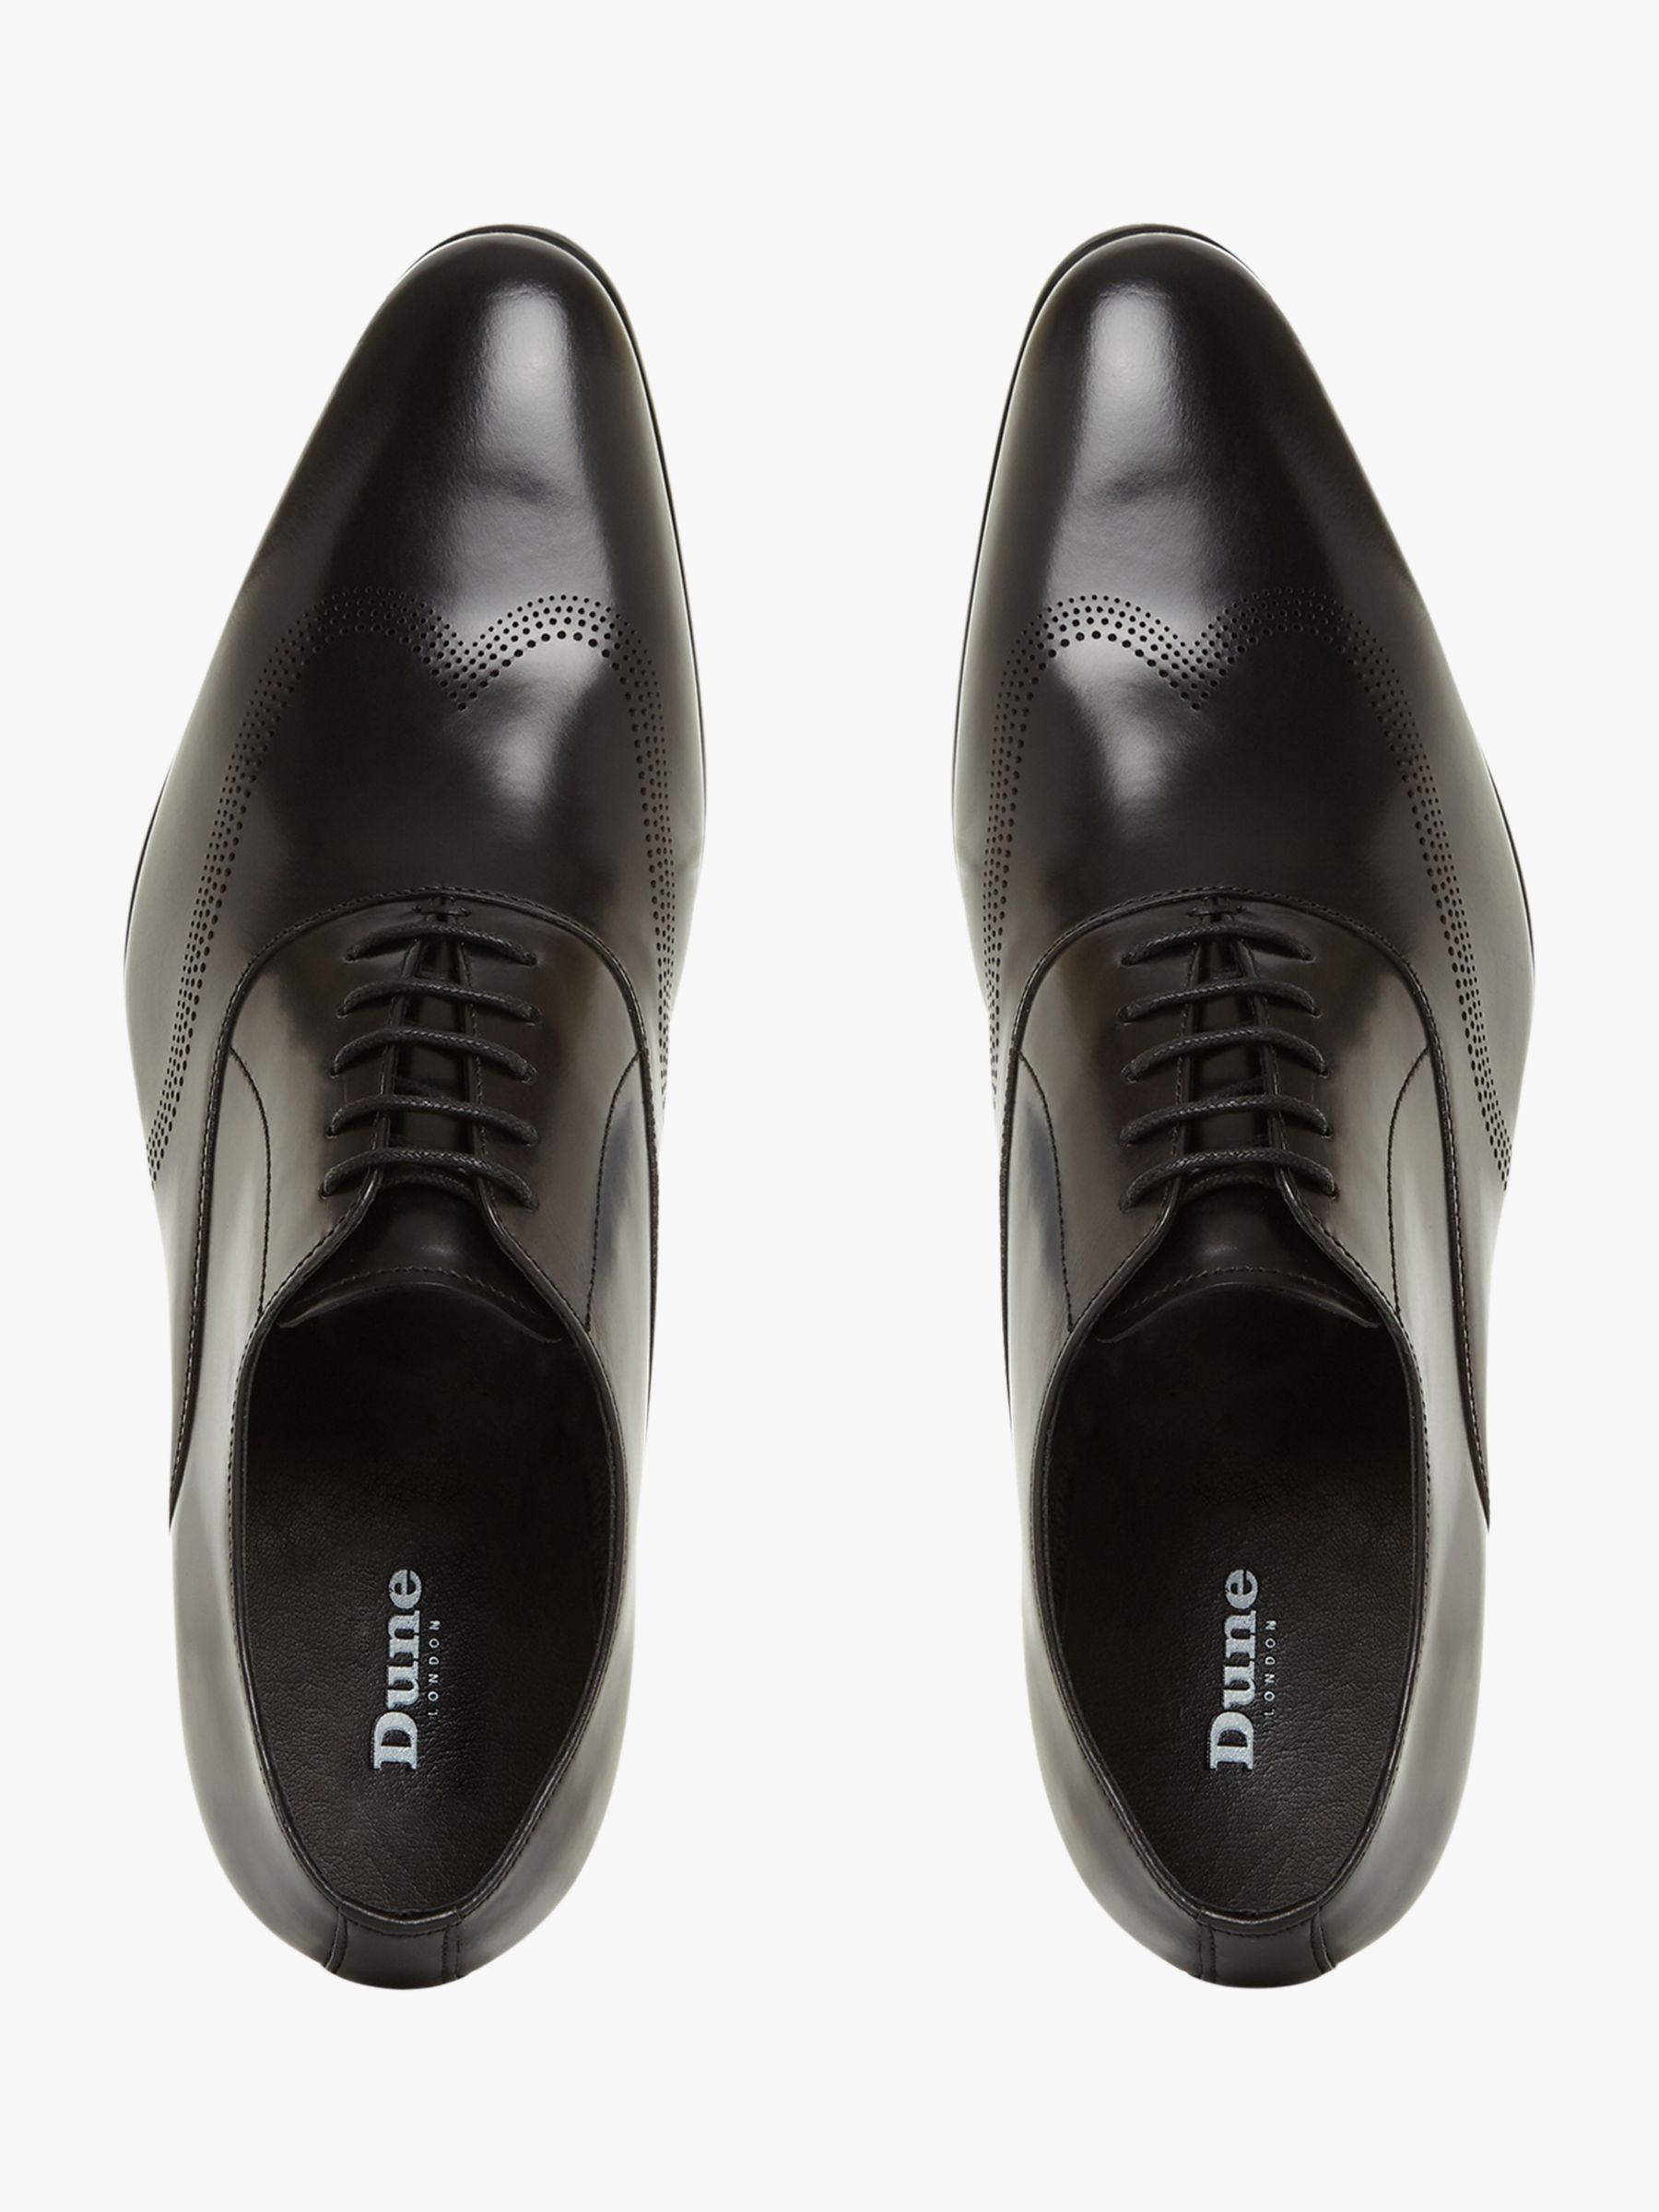 Dune Syn Punched Wingtip Oxford Shoes